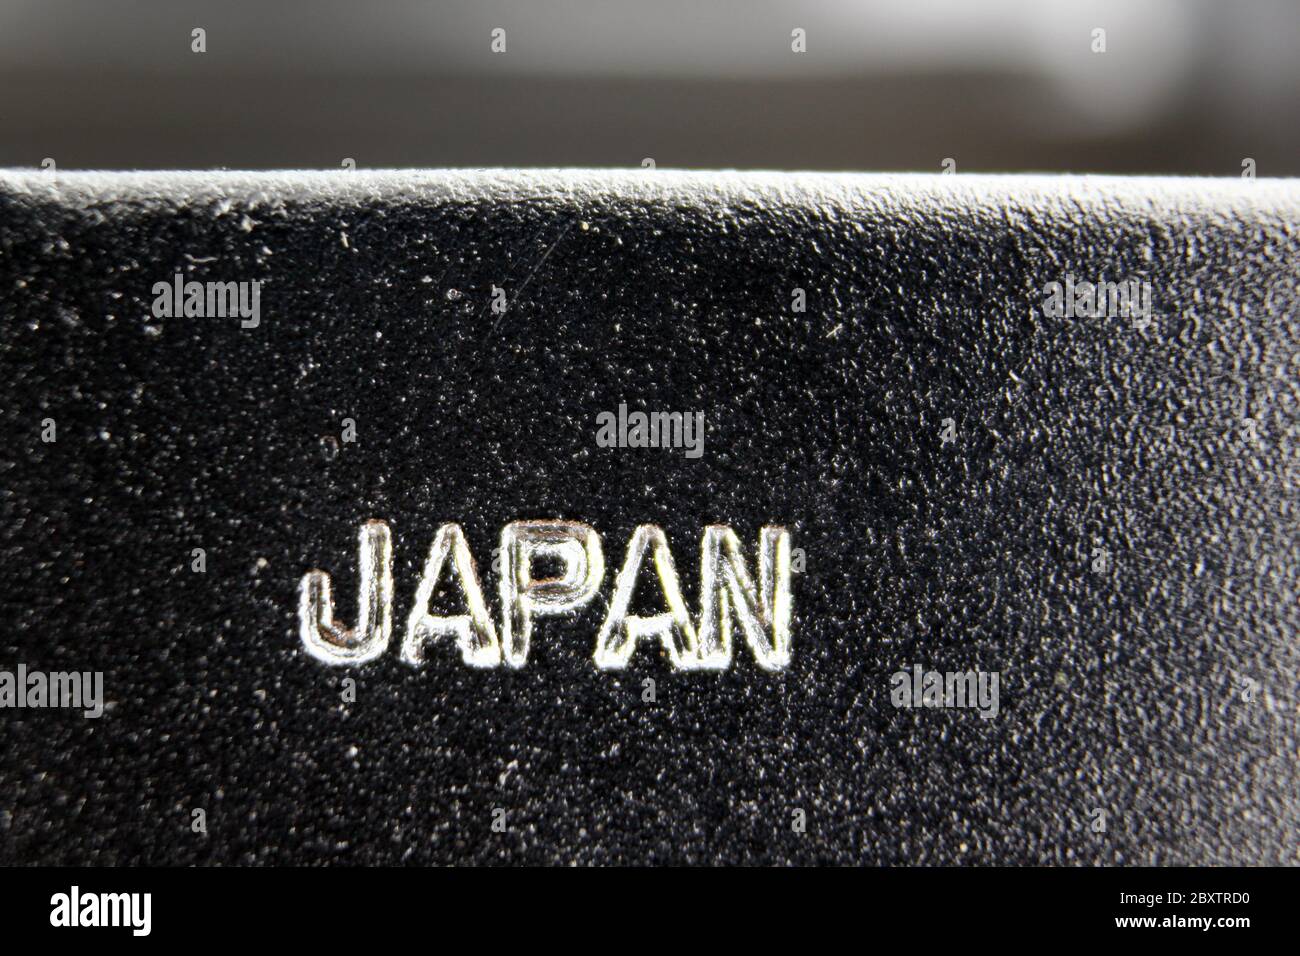 Japan engraved on metal surface, close-up Stock Photo